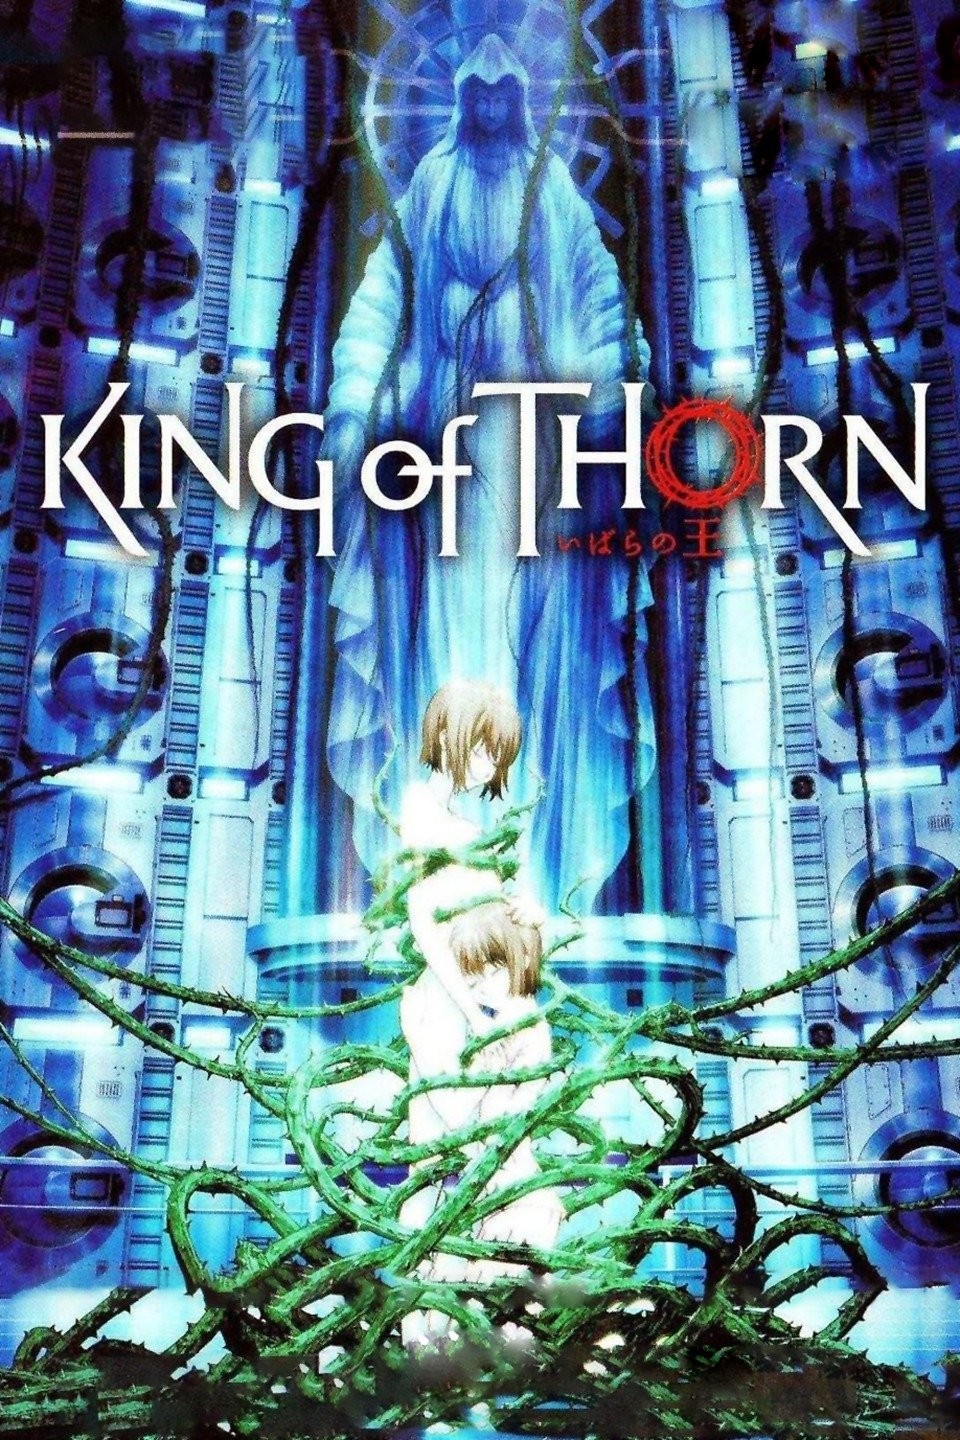 KING OF THORN OFFICIAL TRAILER  SCREENING AT REEL ANIME 2010  YouTube